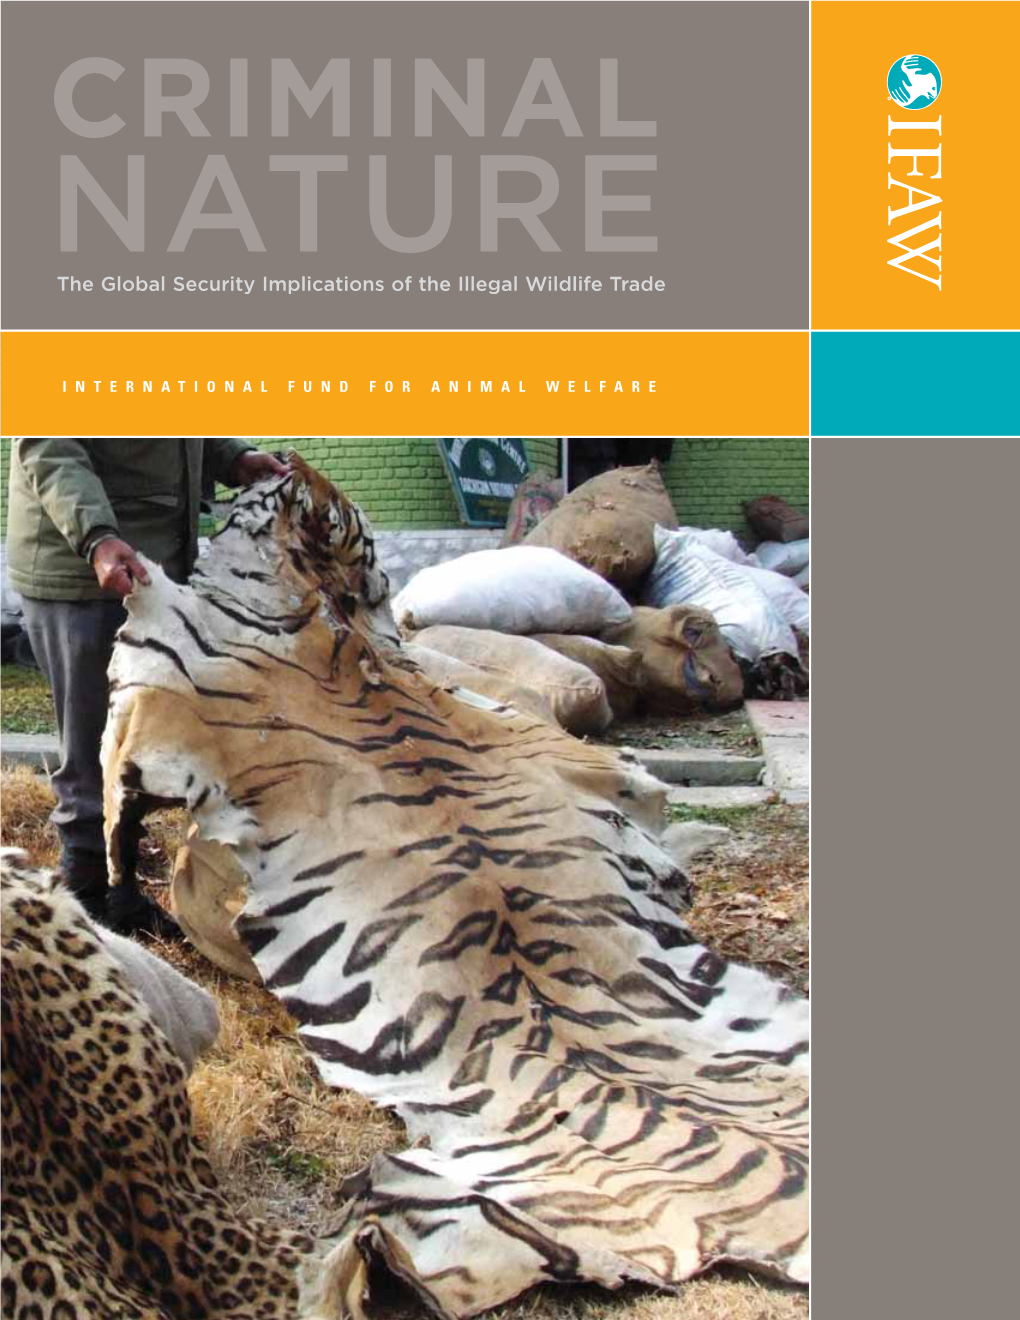 CRIMINAL NATURE the Global Security Implications of the Illegal Wildlife Trade